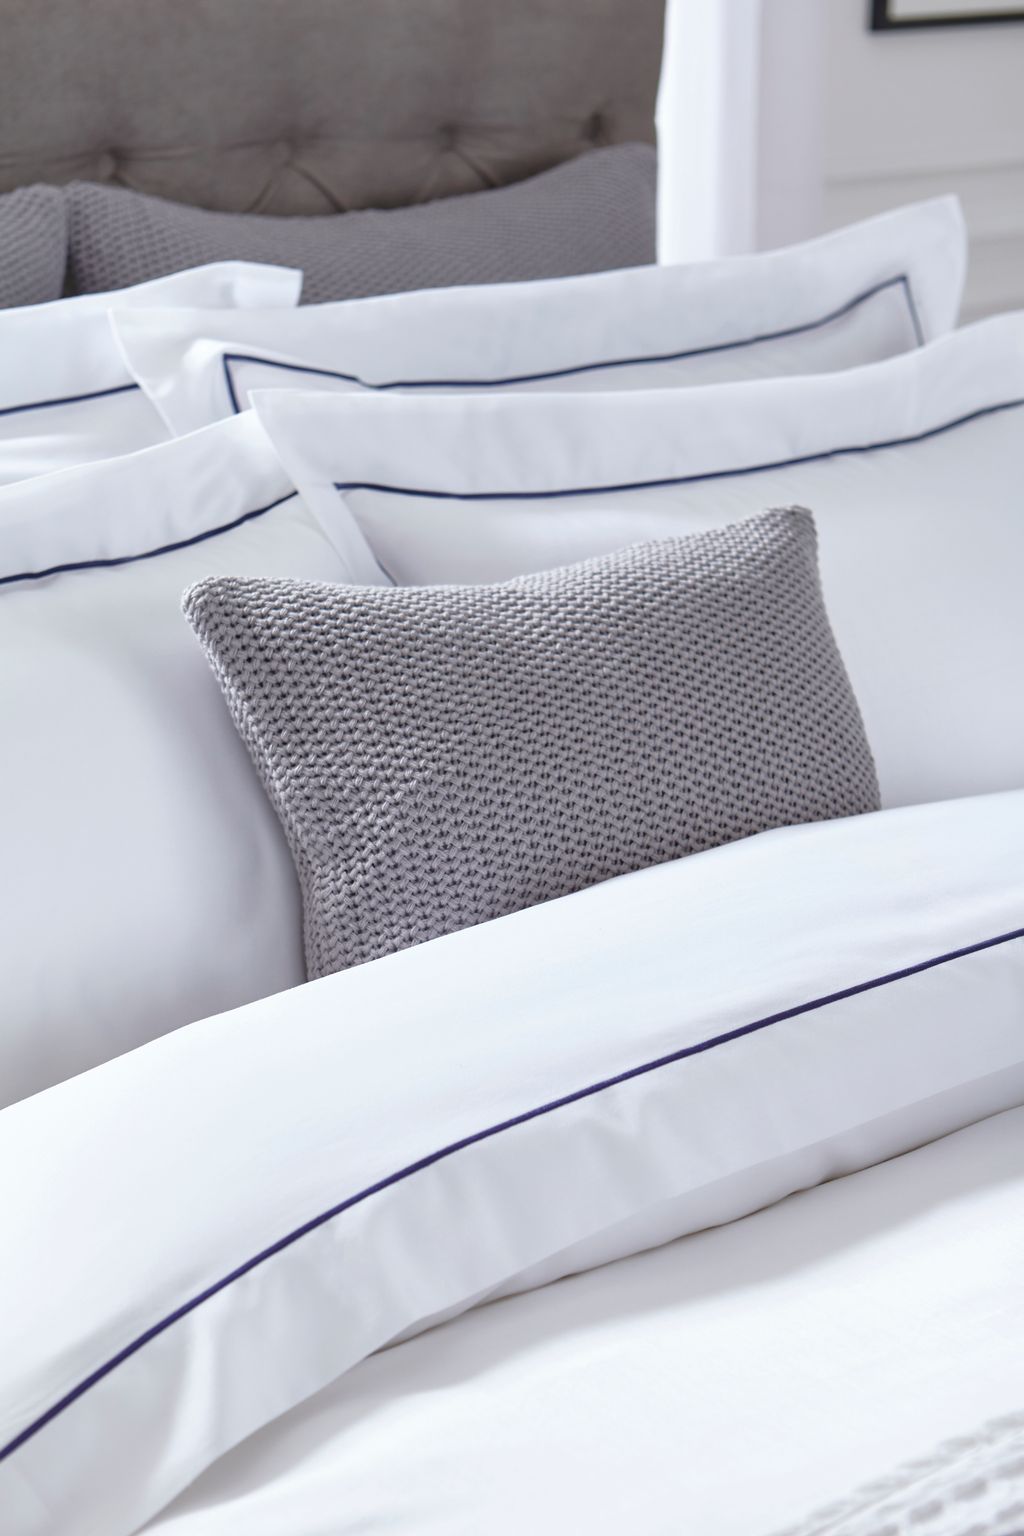 DUSK.com on X: Nothing better than fresh clean cotton bedding. Fall in  love with the Mayfair Collection in bold navy -->   #newbedding #bedgoals #home #whitebedding   / X